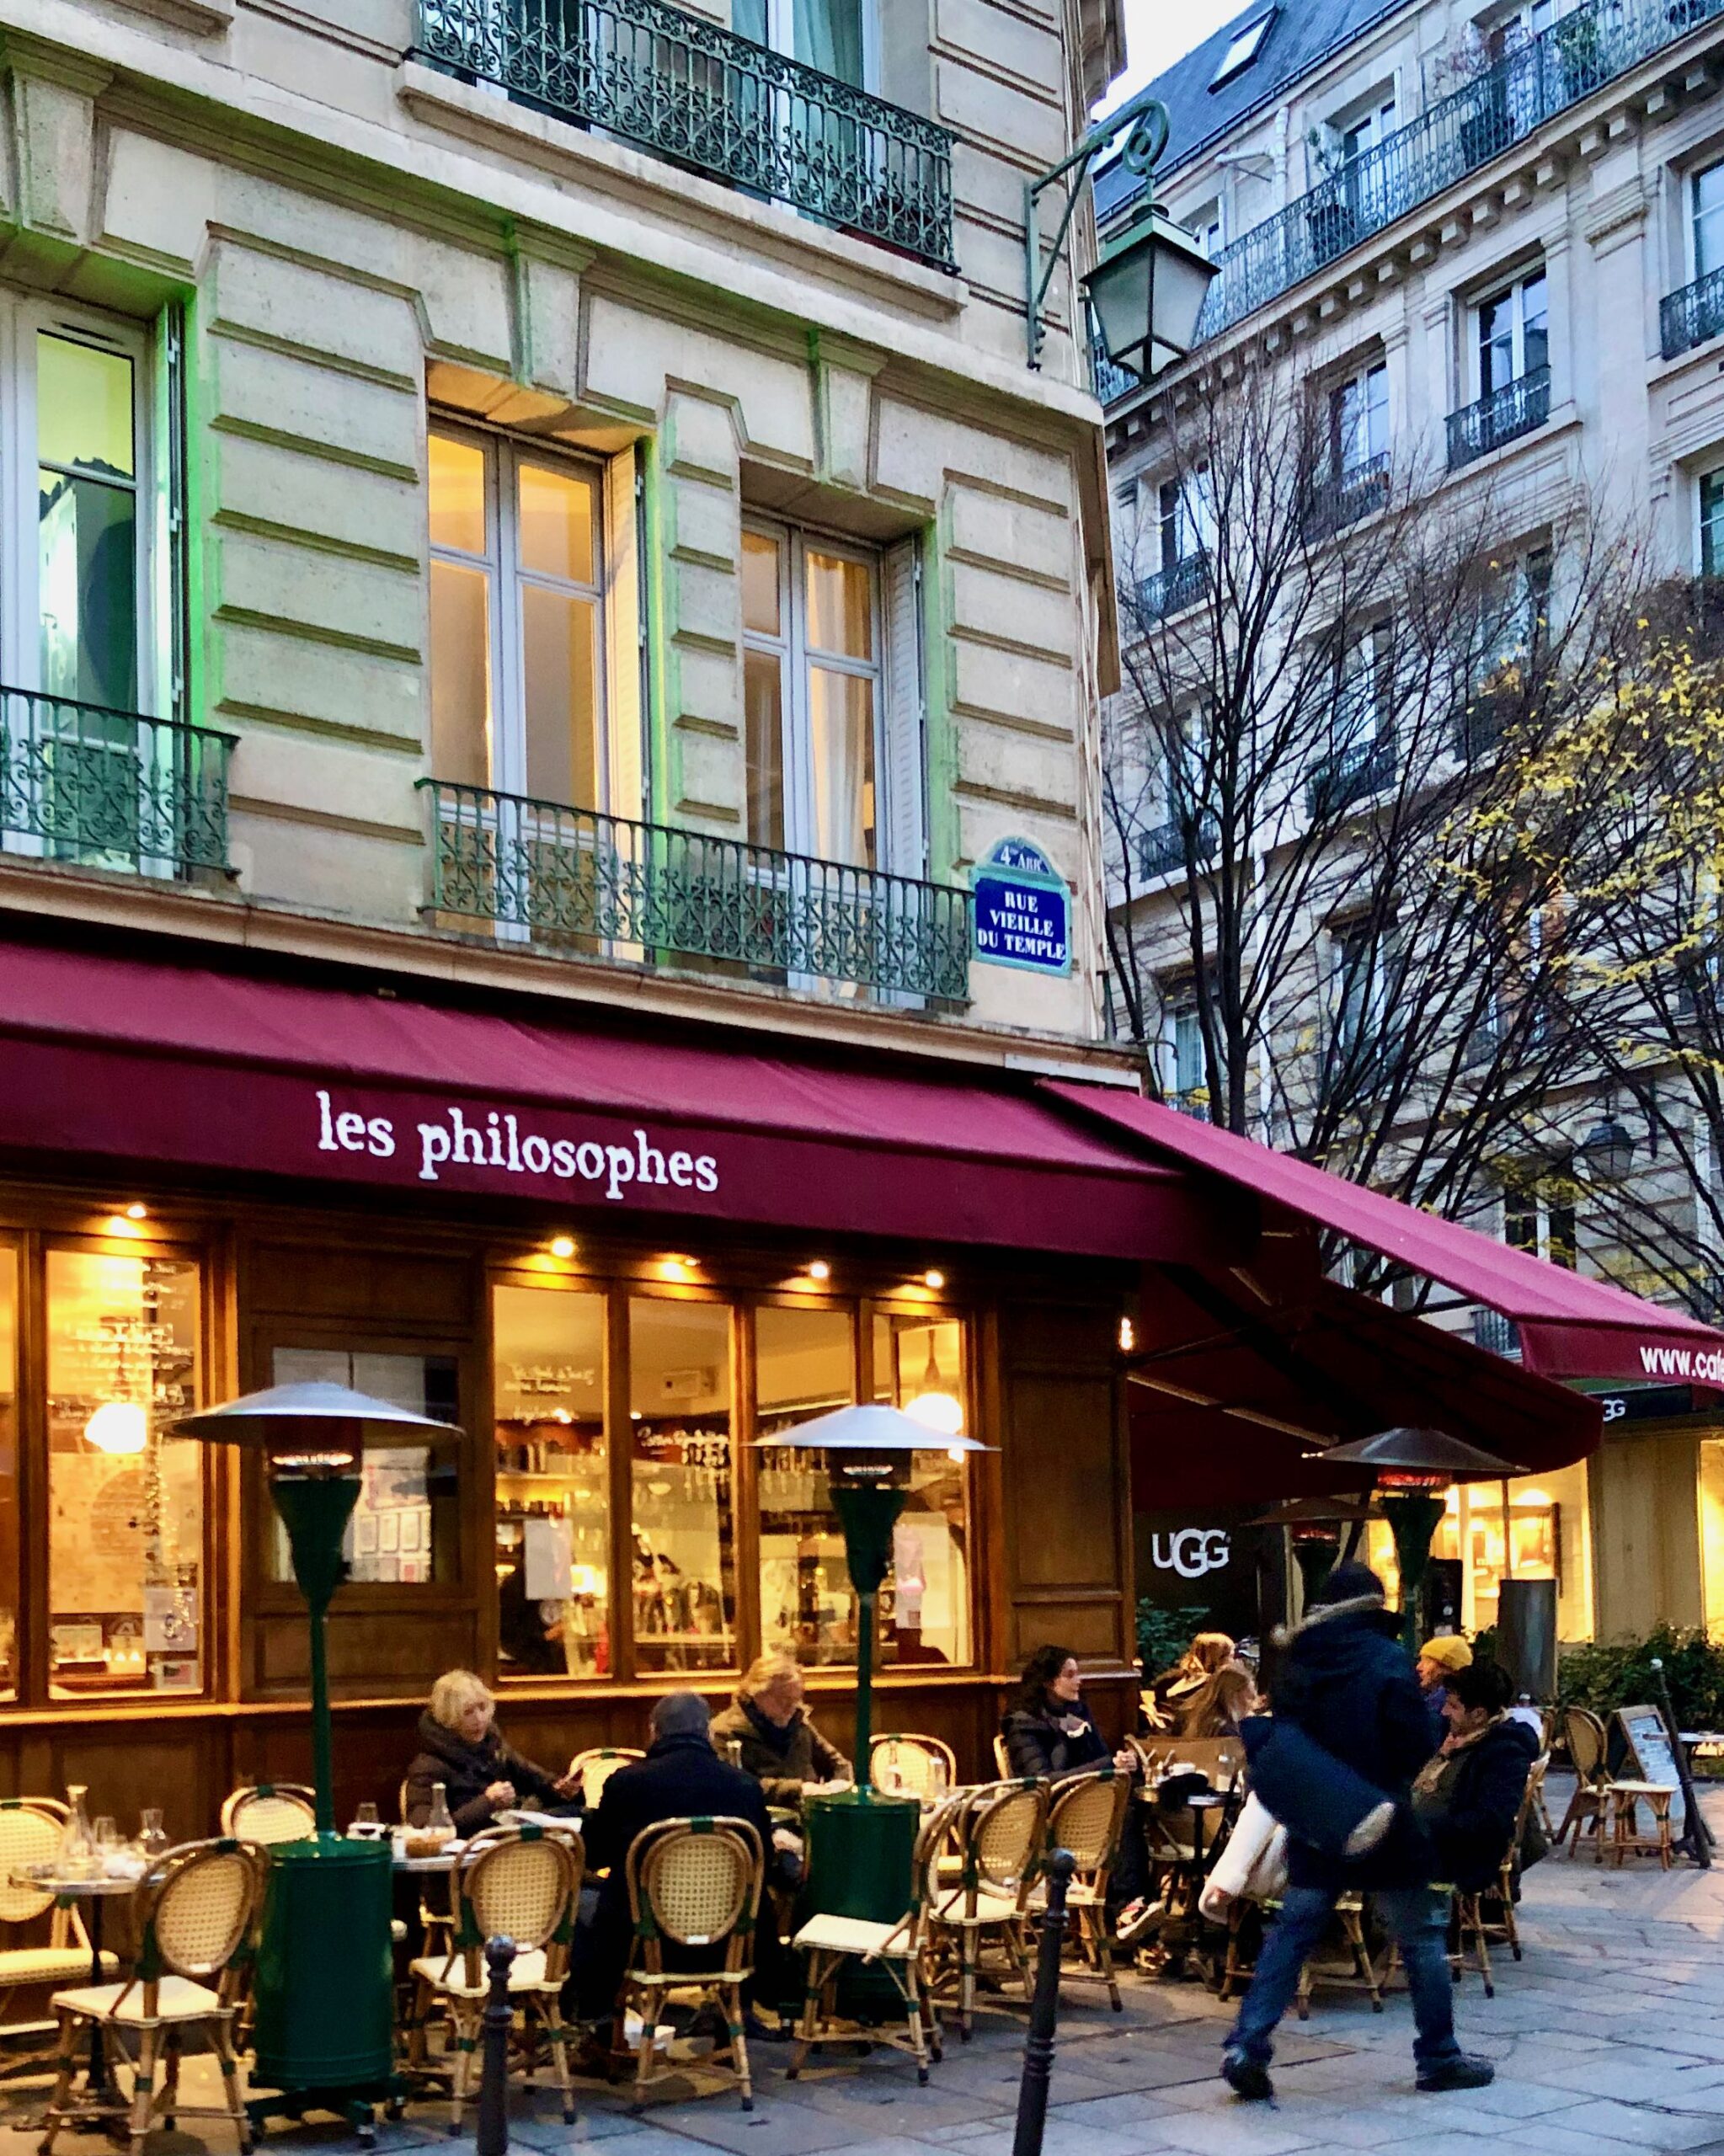 10 Little Ways Paris Has Changed in the Past 15 Years